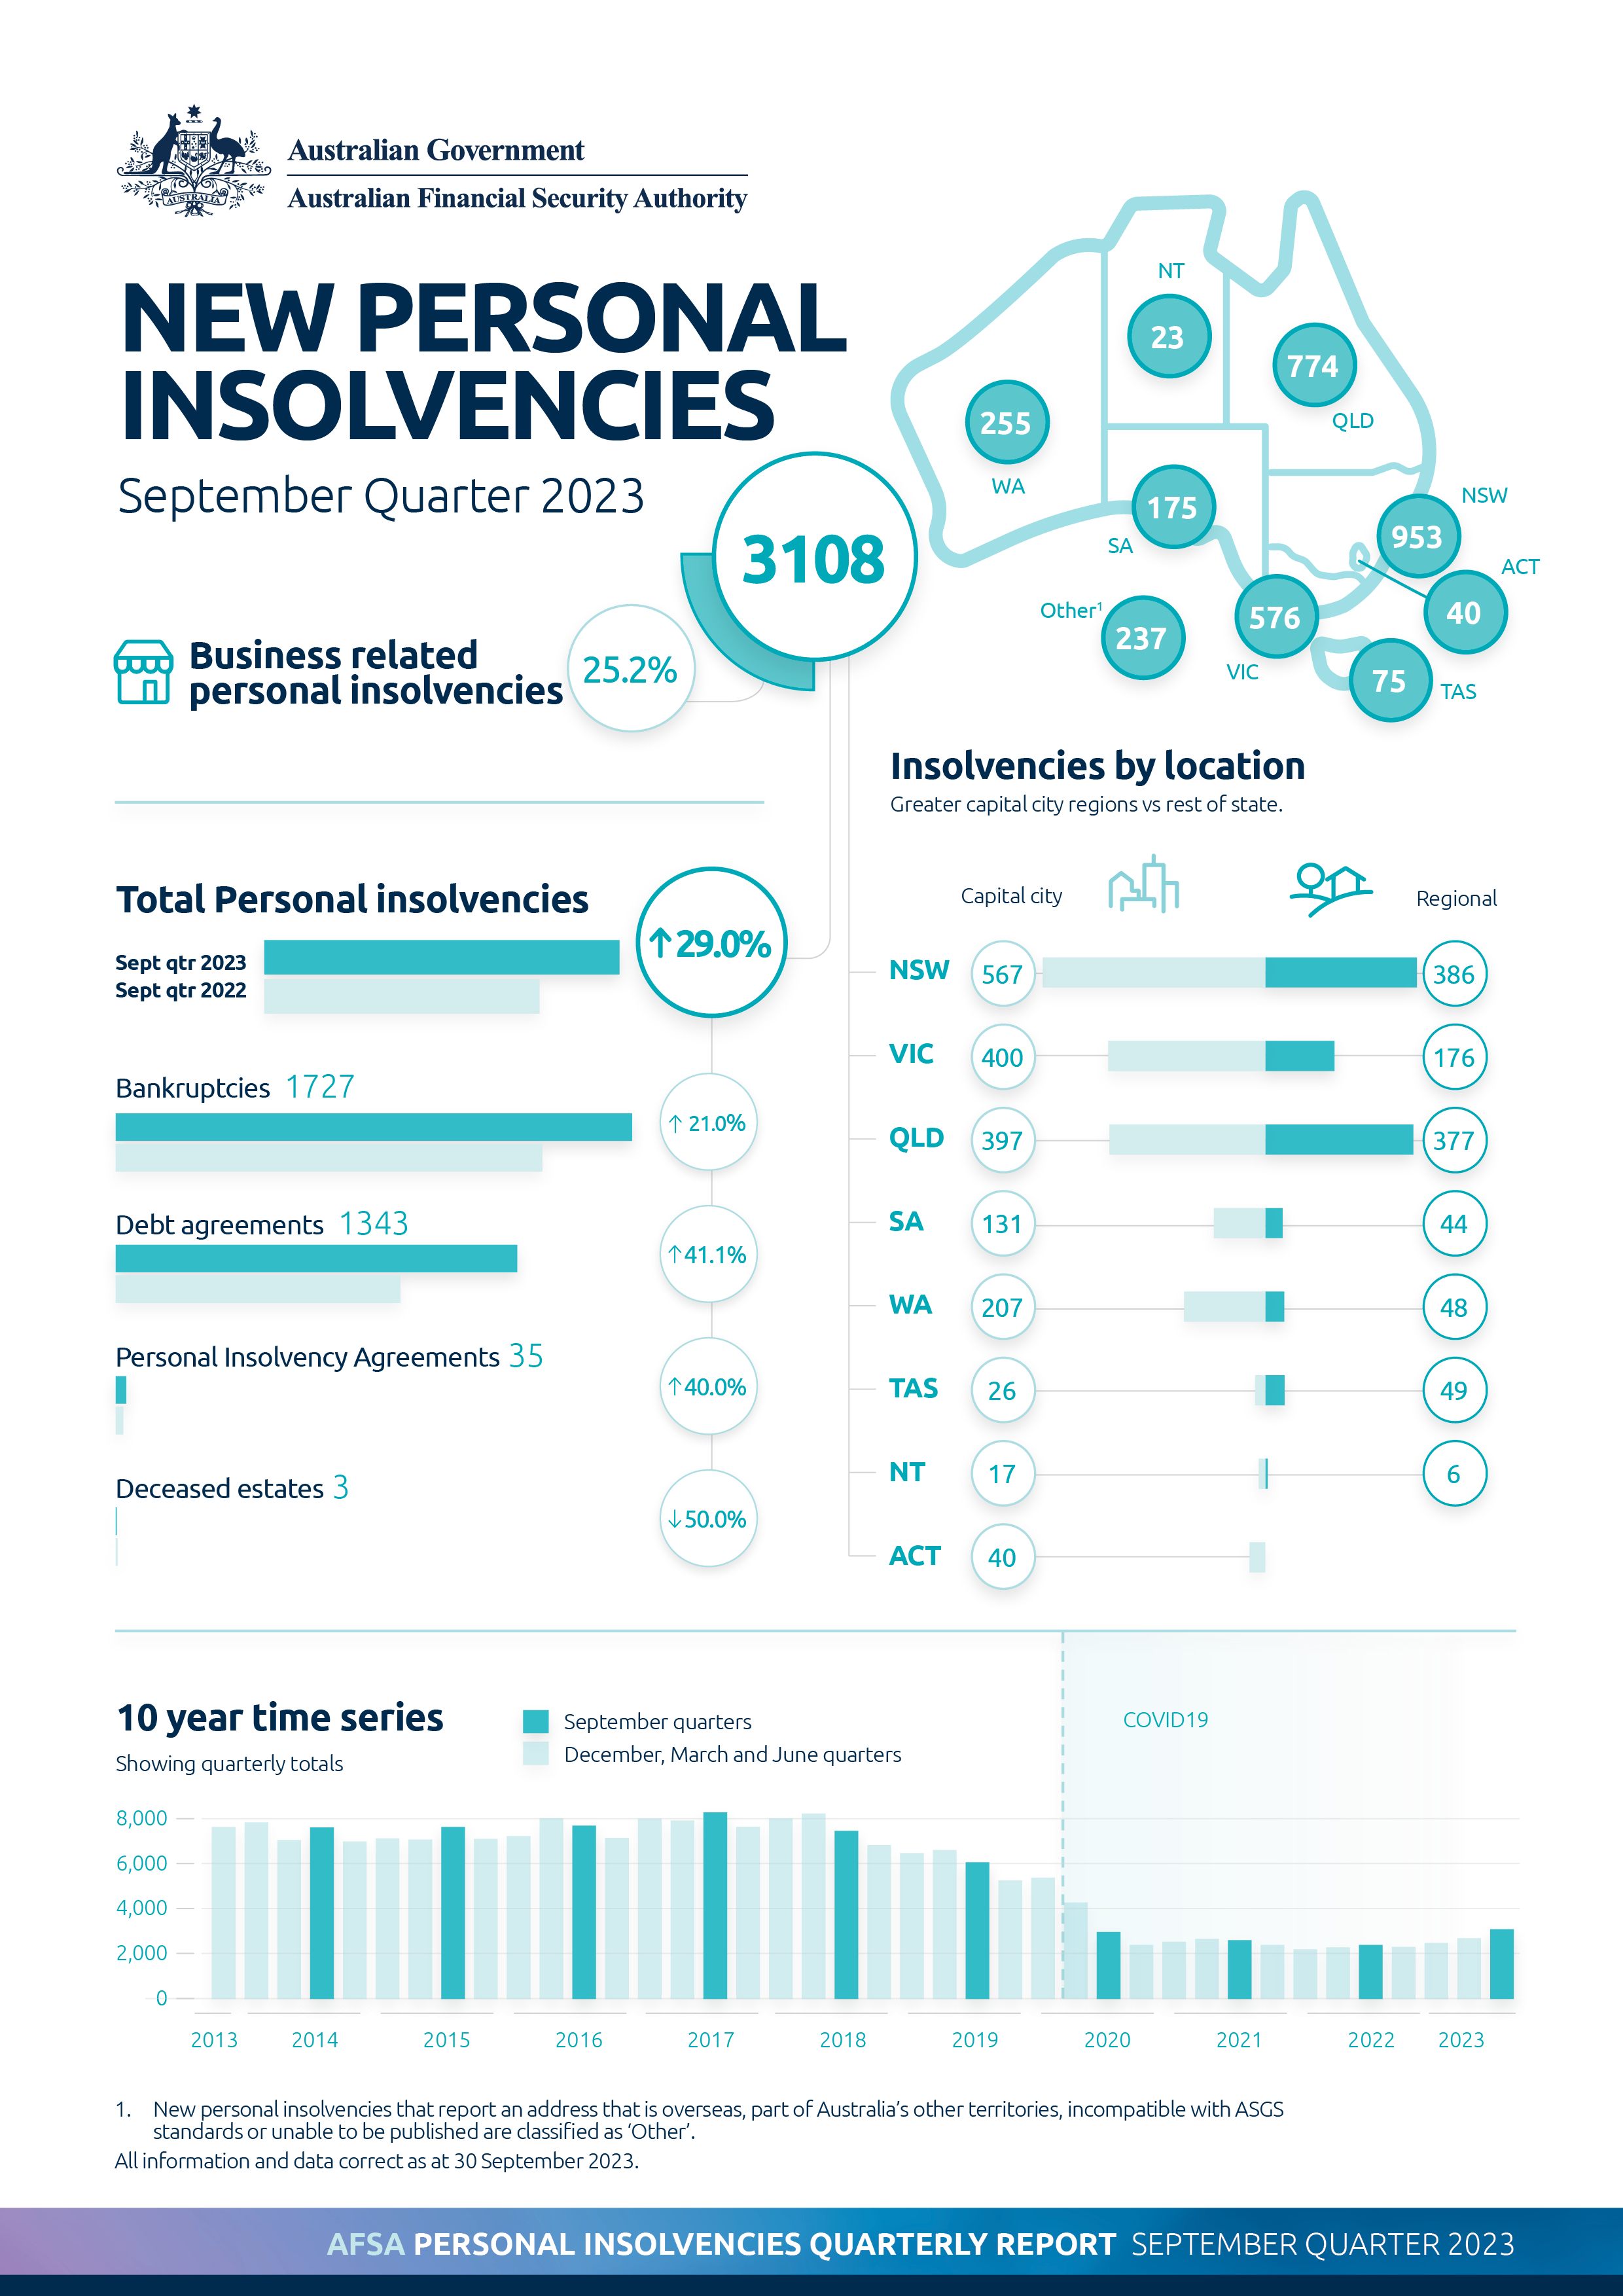 Bar graphs presenting the new personal insolvencies recorded for the September quarter of 2023. To quickly grasp the figures, consult the summarized information provided below. For a more comprehensive breakdown, refer to the workbooks available on the Quarterly Personal Insolvency Statistics page.